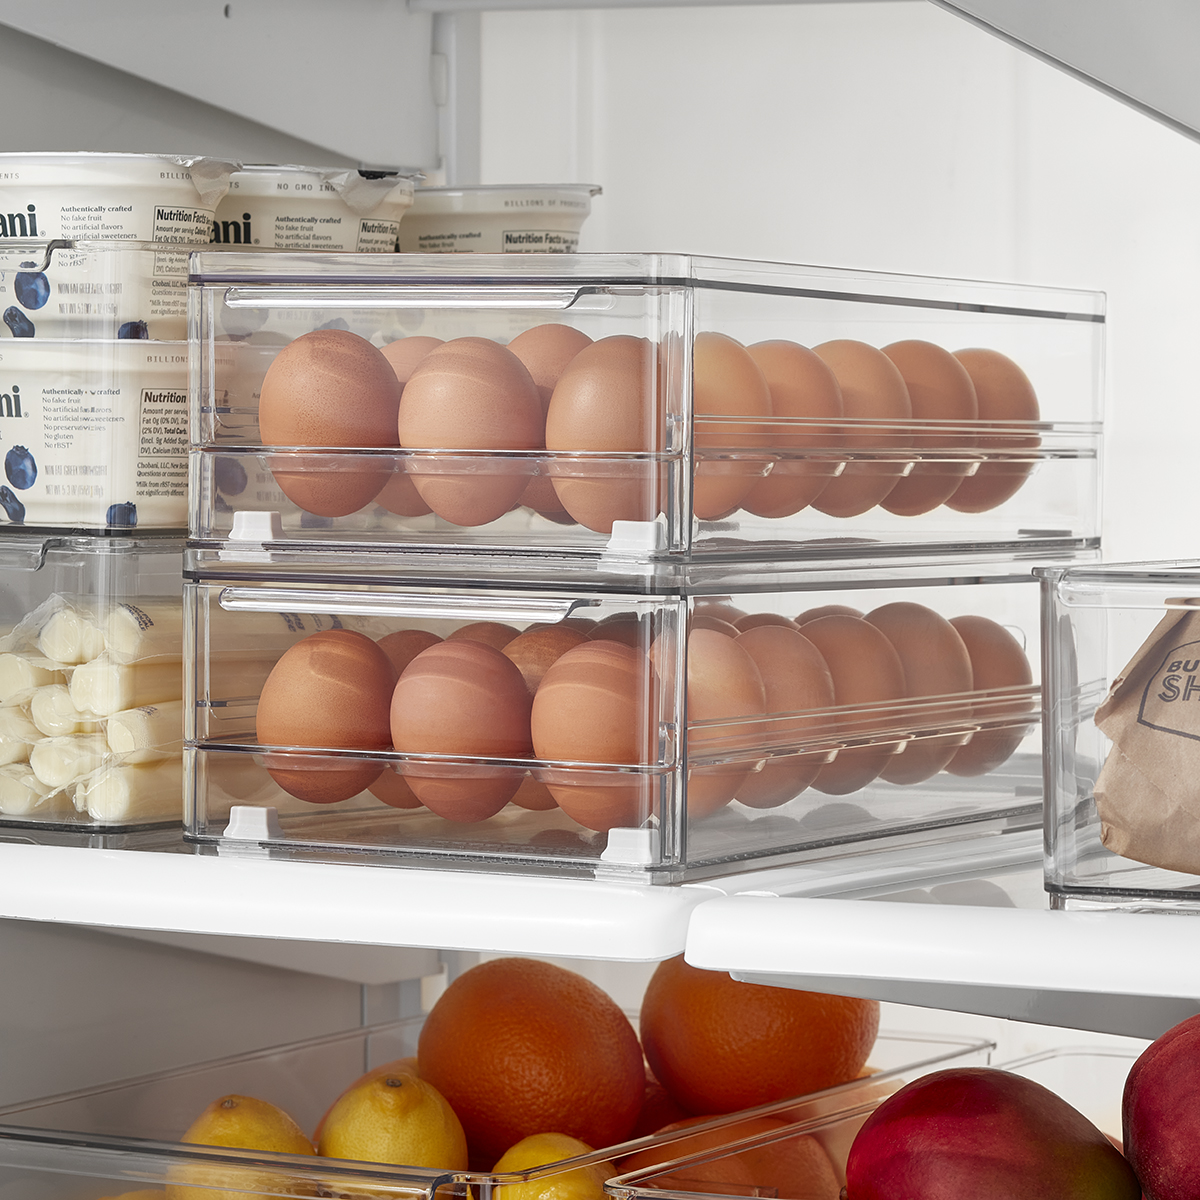 https://www.containerstore.com/catalogimages/470383/10090583-egg-drawer-pvl.jpg